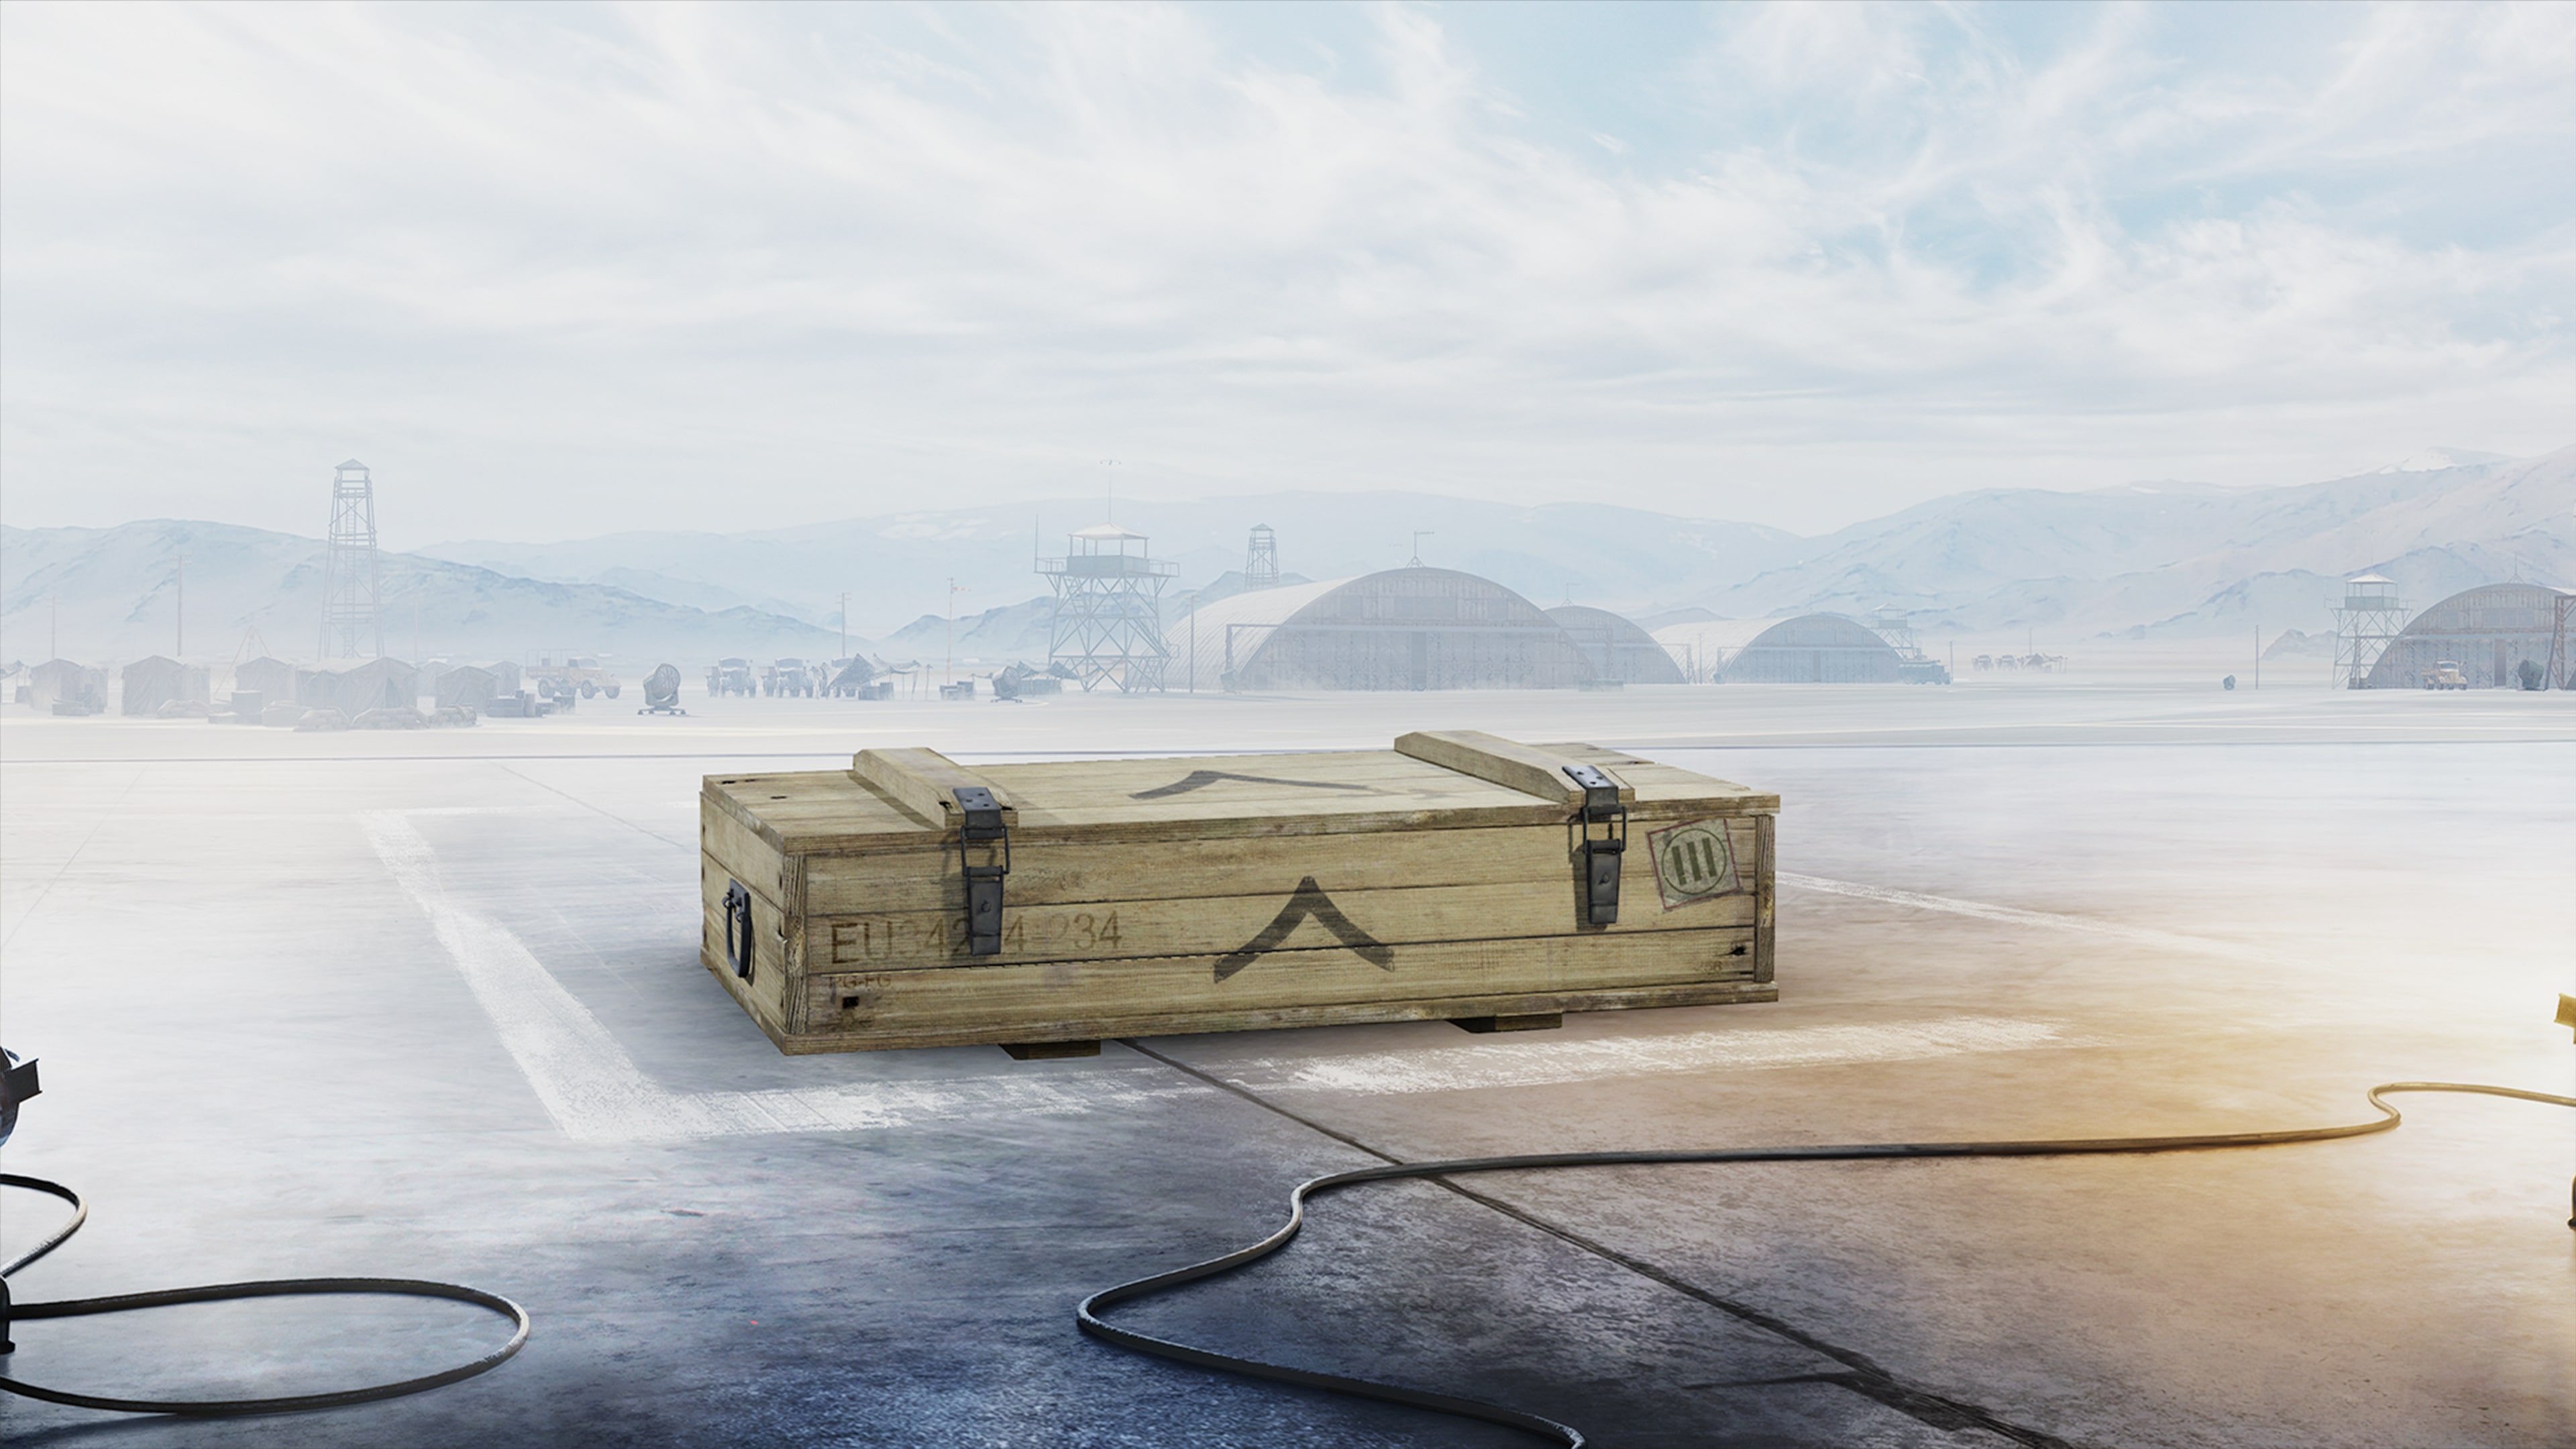 World of Tanks - Private War Chest